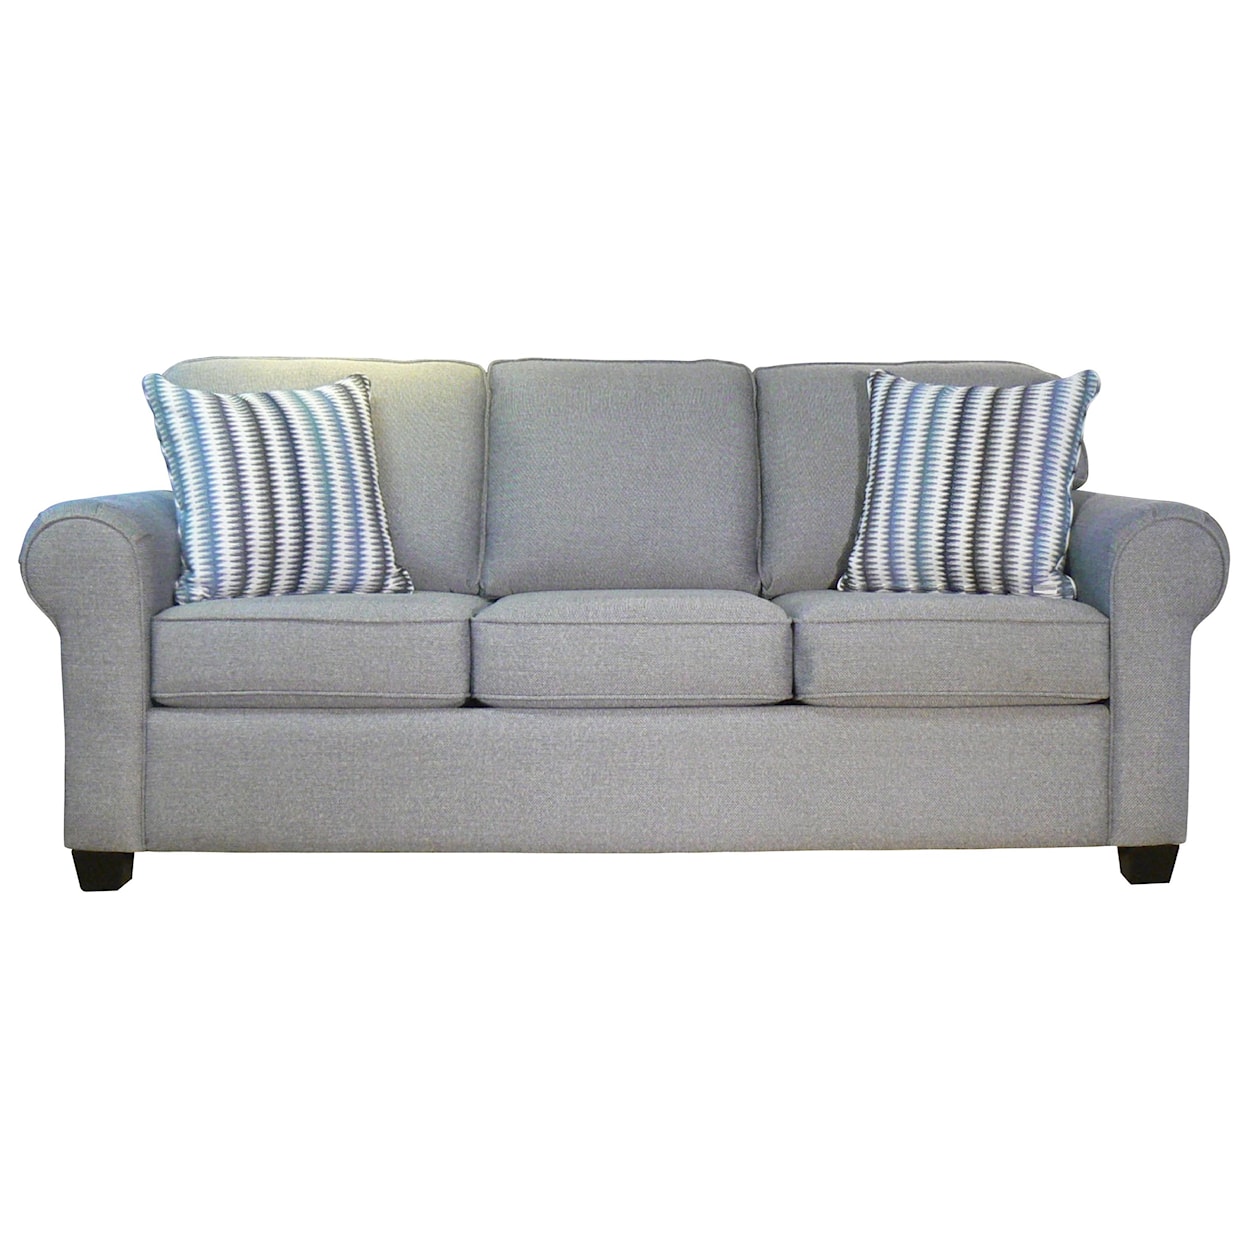 Taelor Designs Porter Queen Sofabed